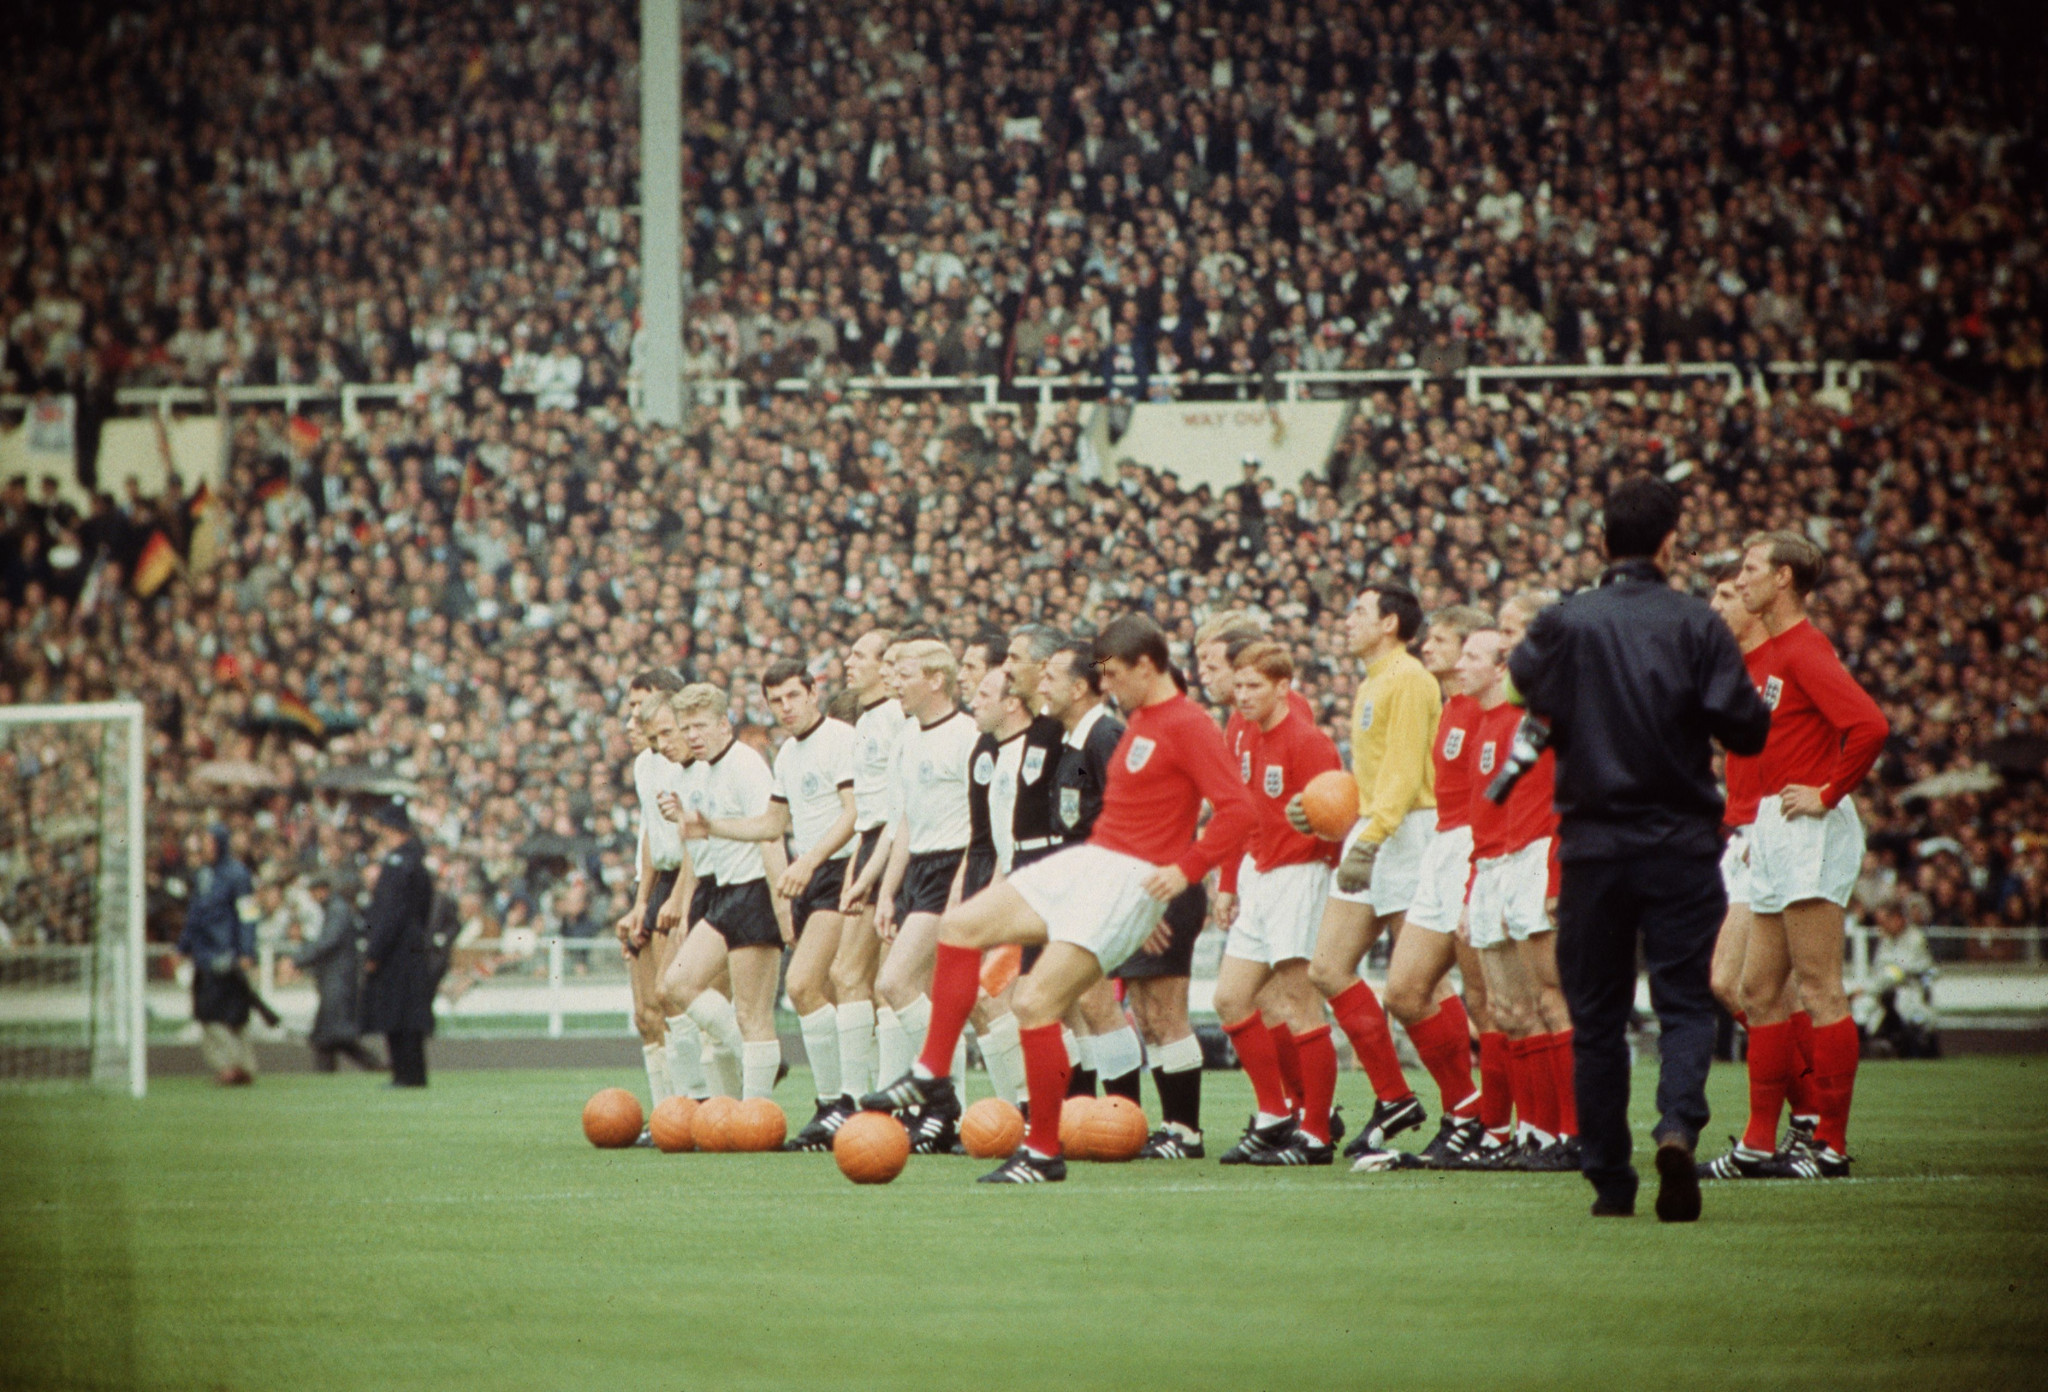 When England won the World Cup in 1966, it was a more sedate affair than major sporting events today ©Getty Images